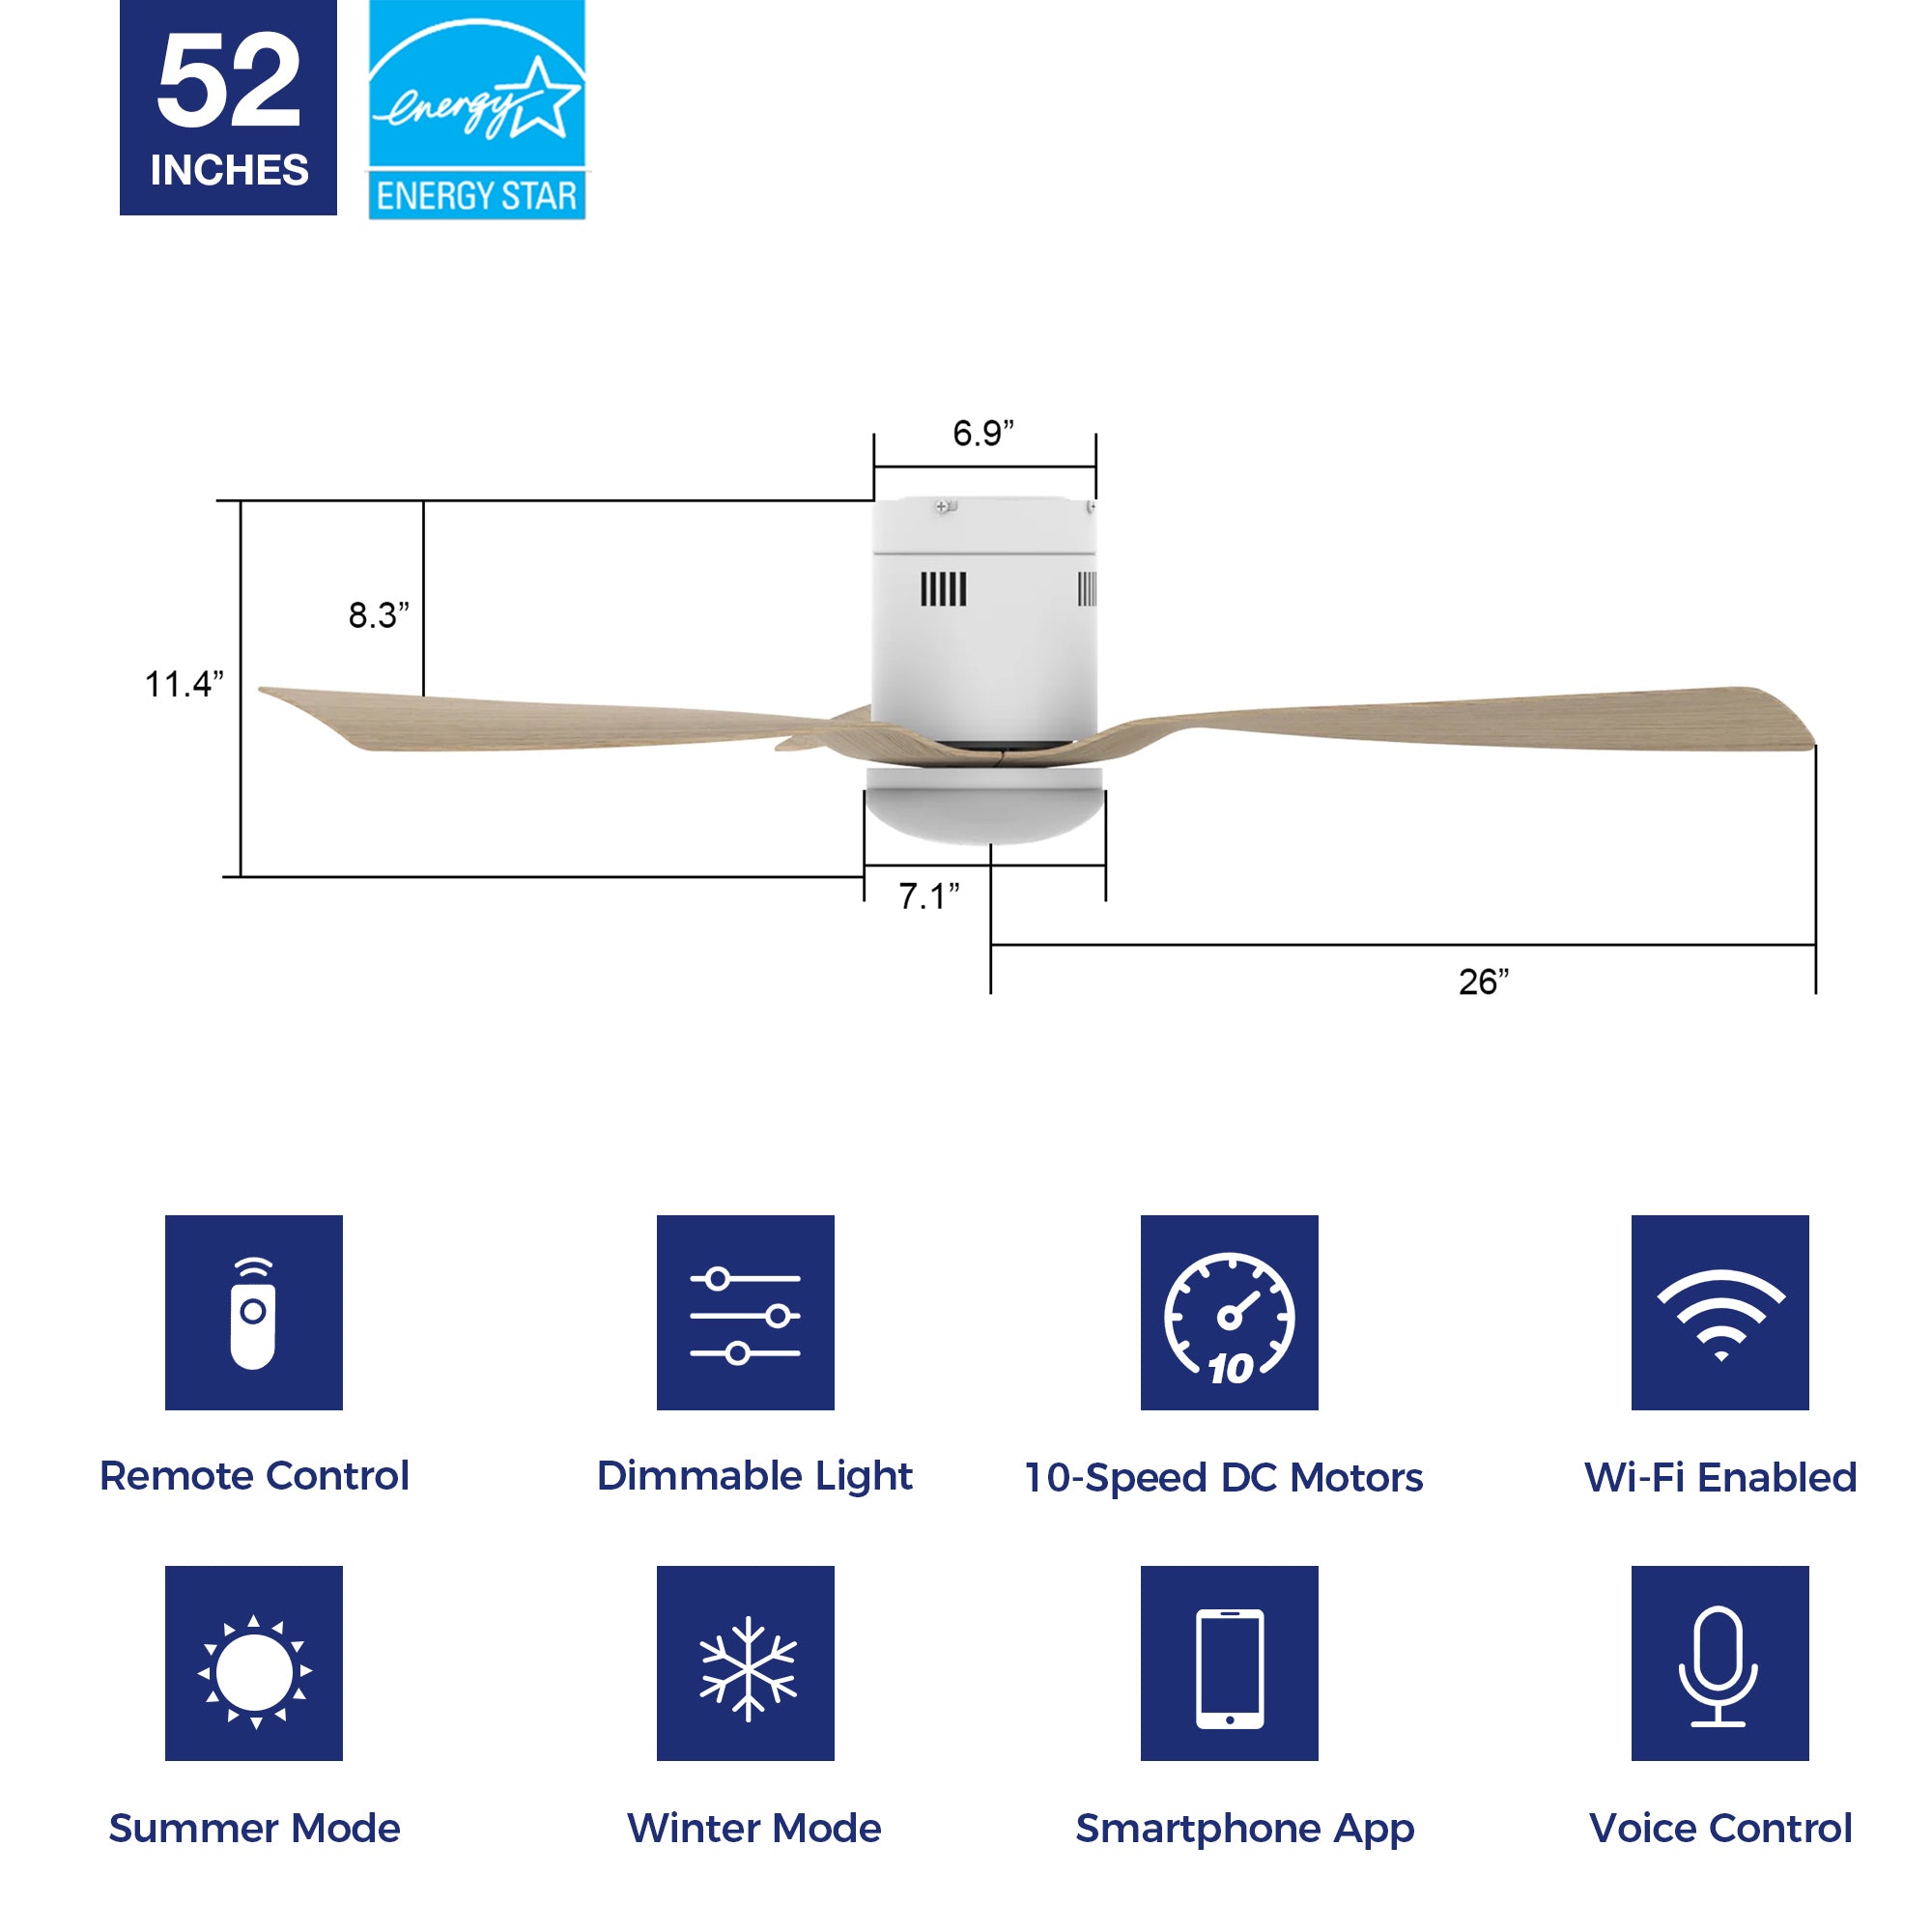 Smafan Elite Smart Ceiling Fan is compatible with Alexa, Siri, Google Assistant, smart app. It will bring a modern touch to your home décor. Elegant, quietness, and energy saving are some of its advantages. Available for outdoor/indoor use.